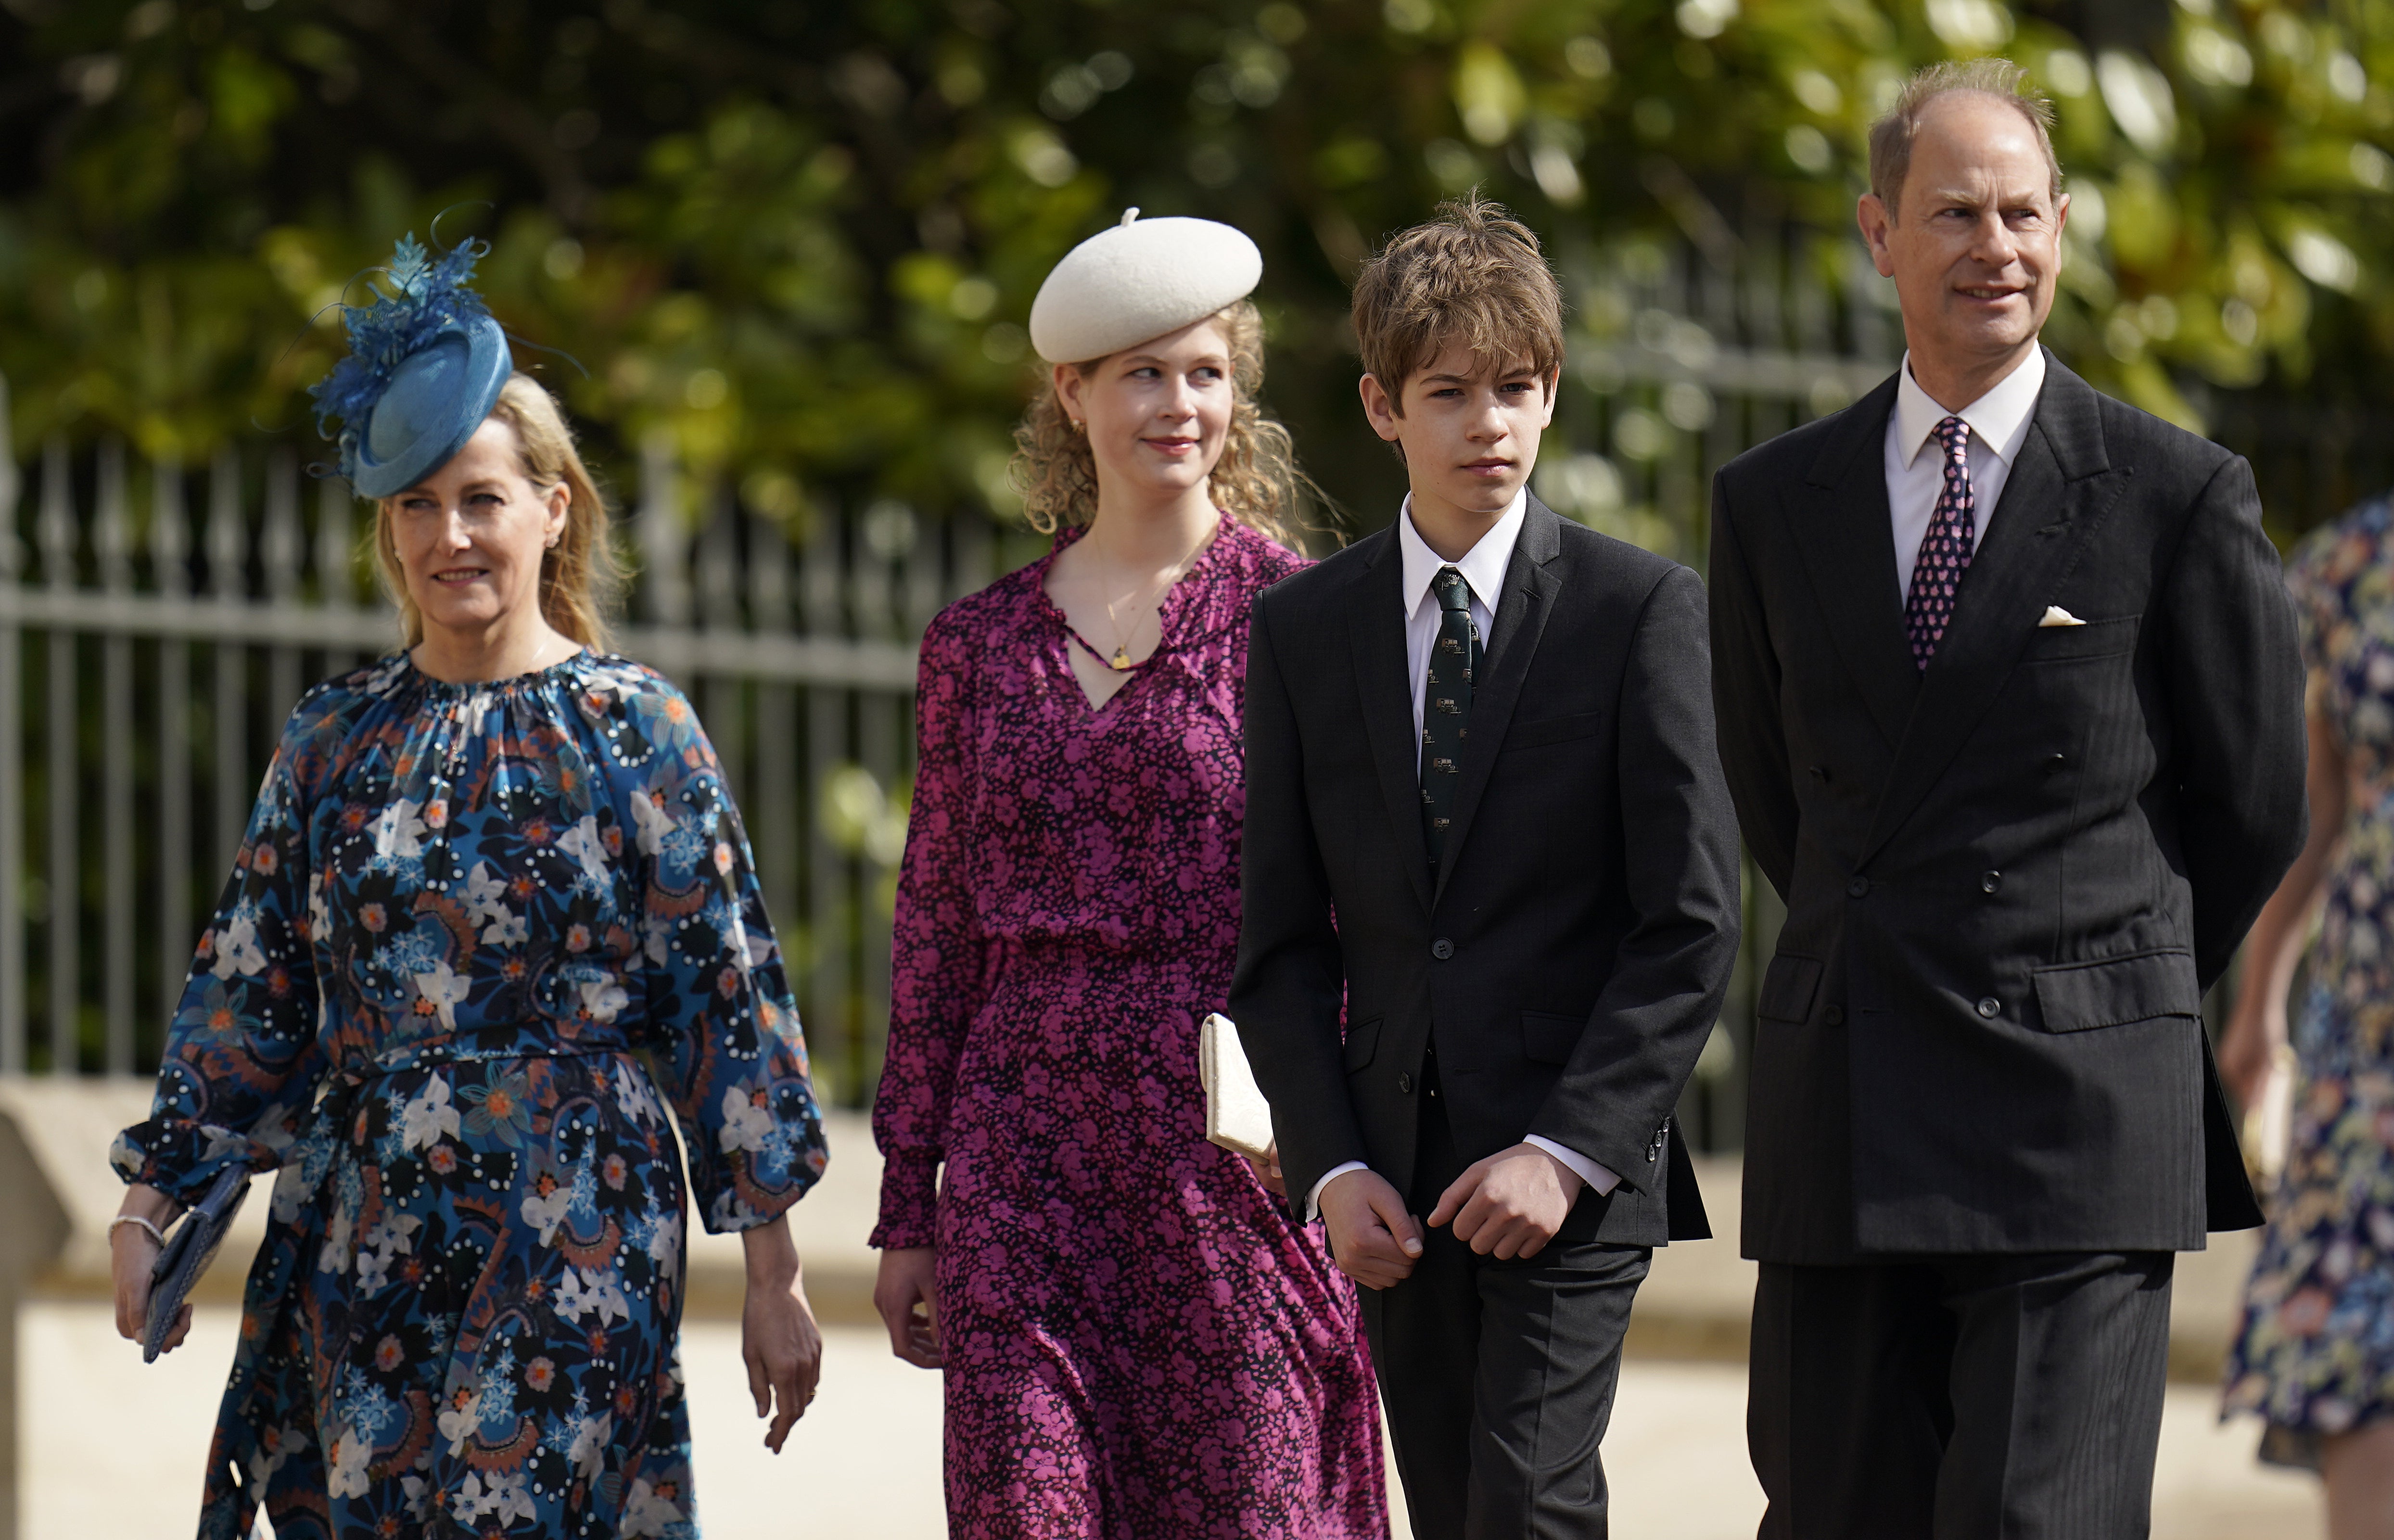 The Countess of Wessex, Lady Louise Mountbatten-Windsor, Viscount Severn and the Earl of Wessex attend the Easter Service at St George’s Chapel (Andrew Matthews/PA)